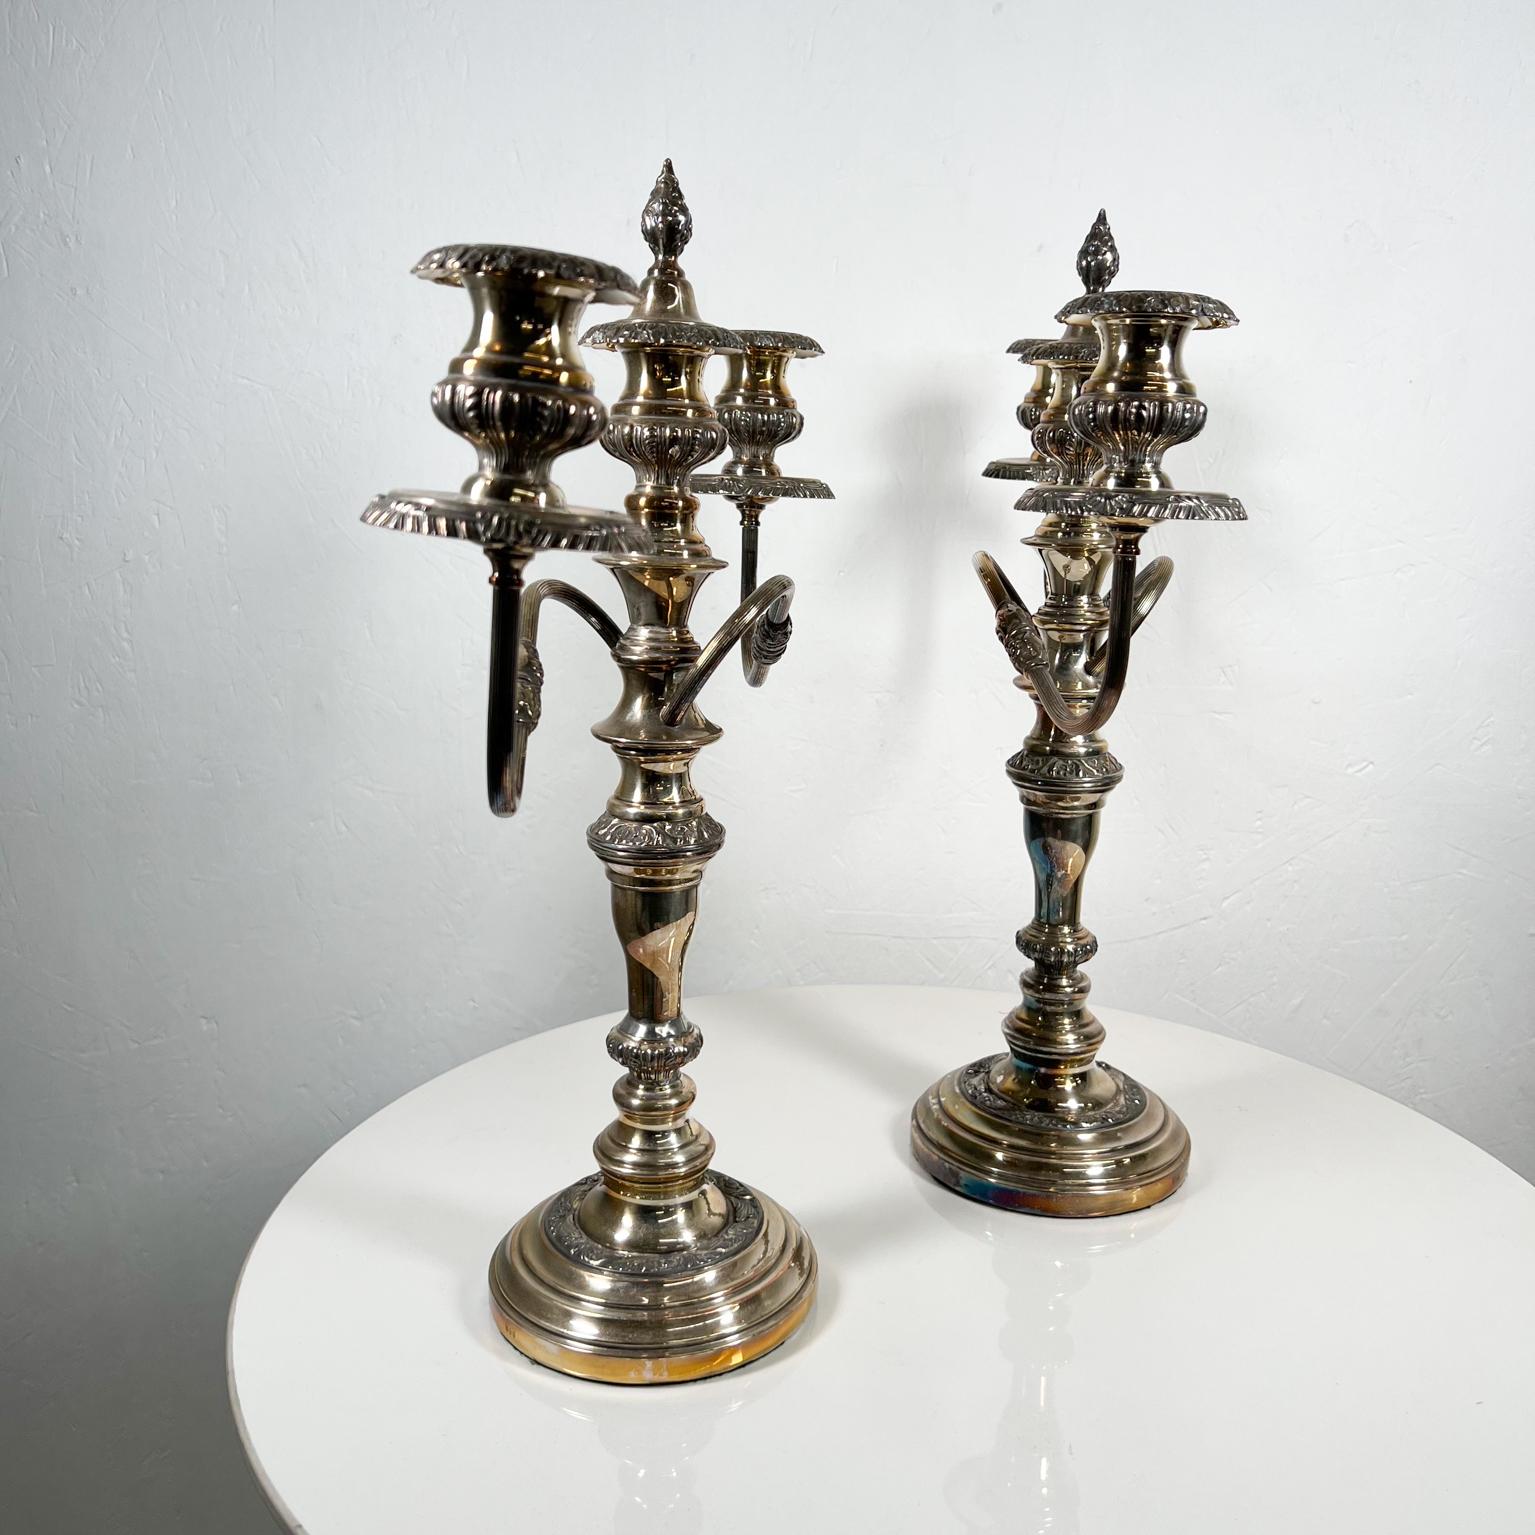 1940s Pair of Silverplate Candelabras by Goldfeder Silver Company New York 2